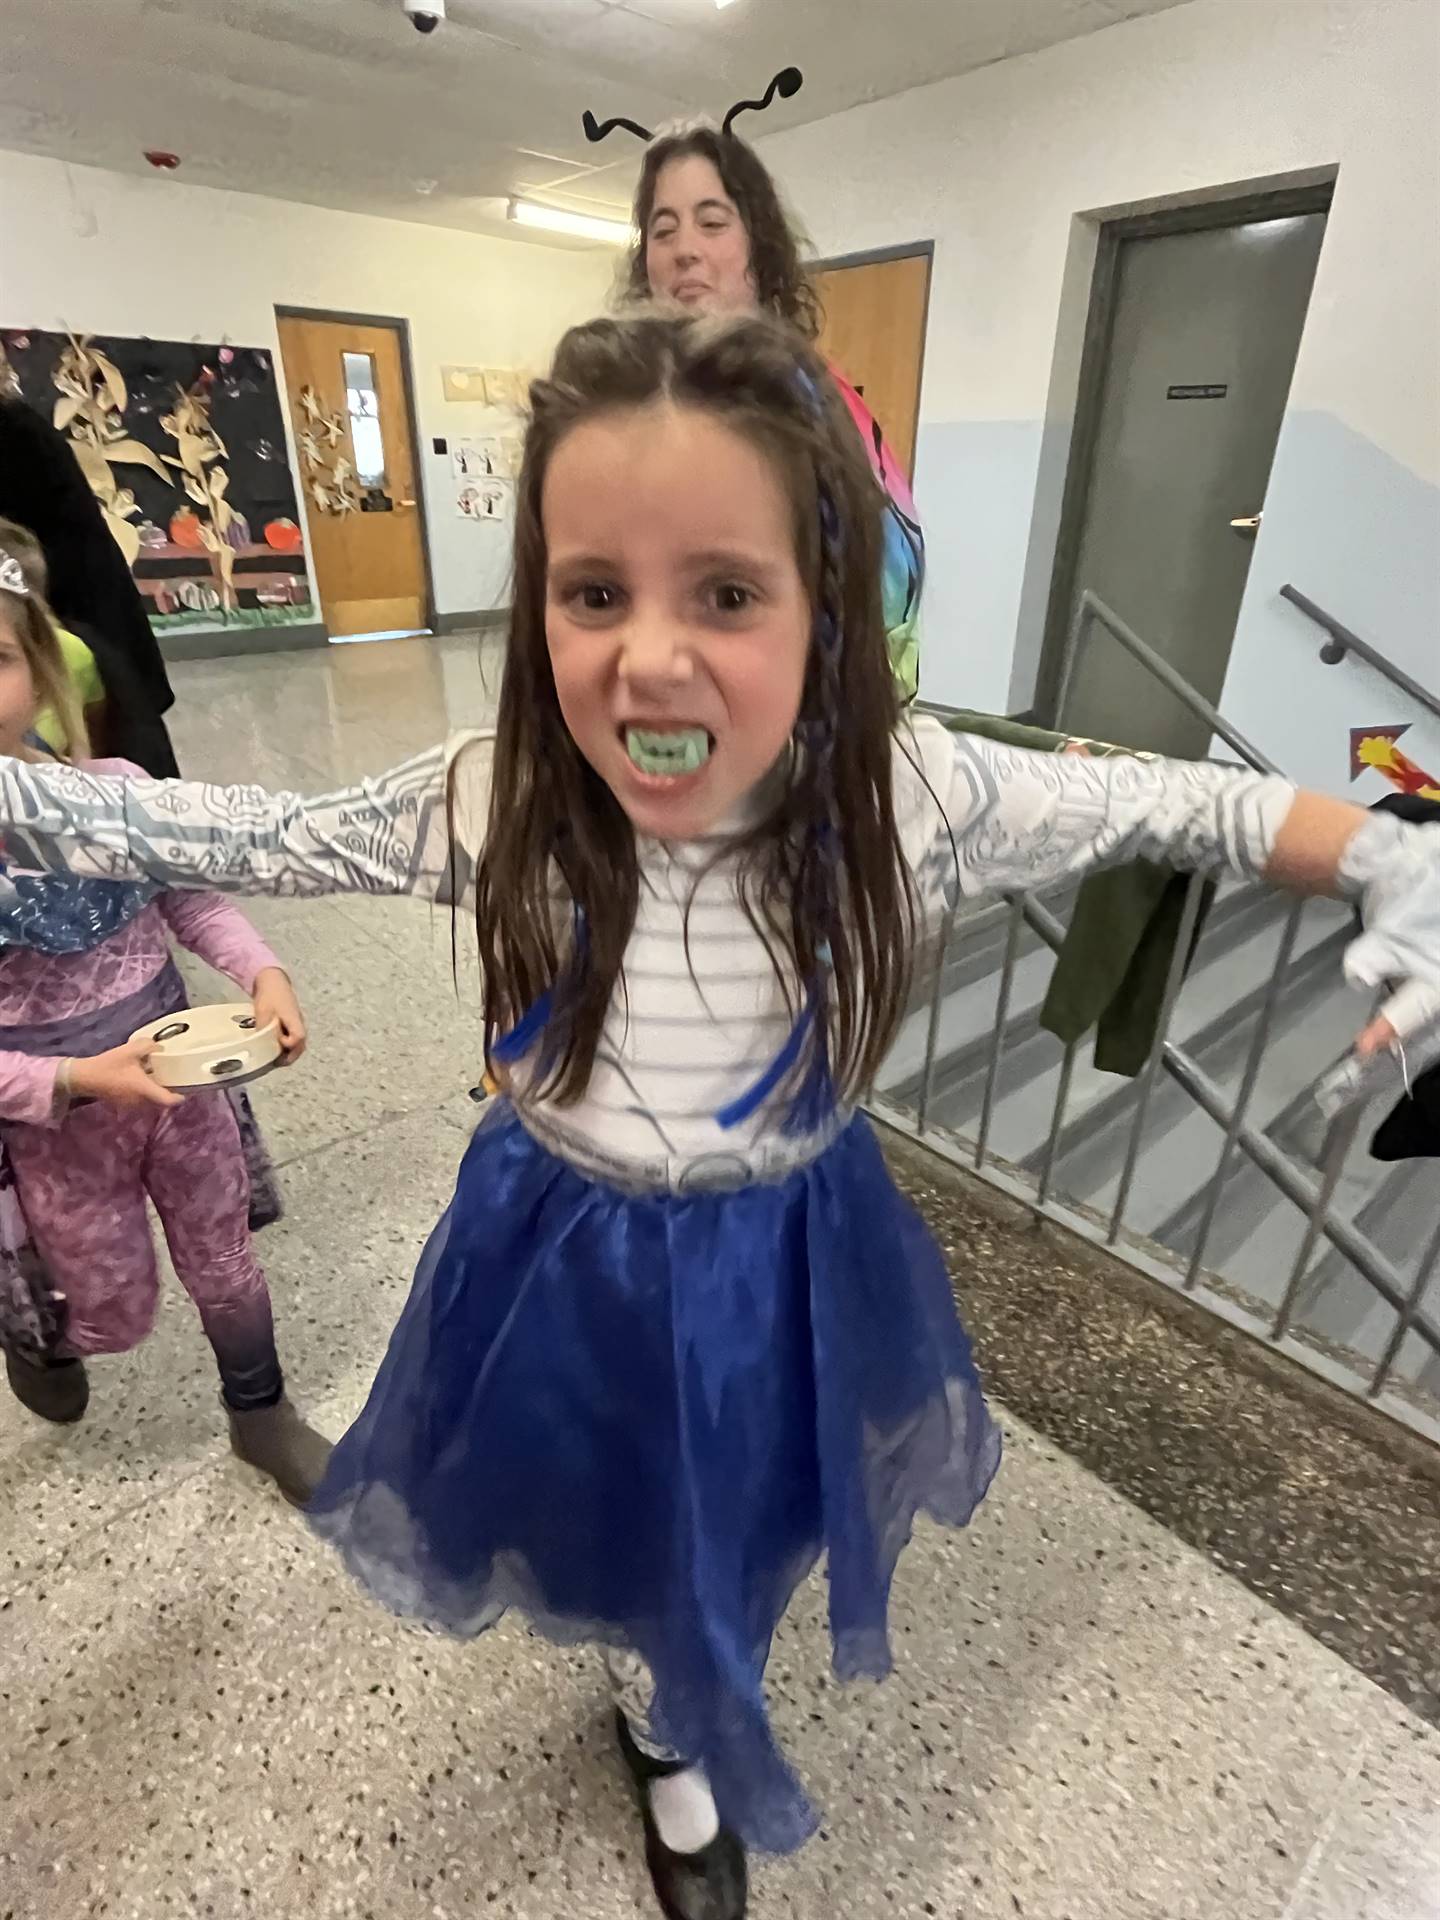 a student dressed up with big teeth!